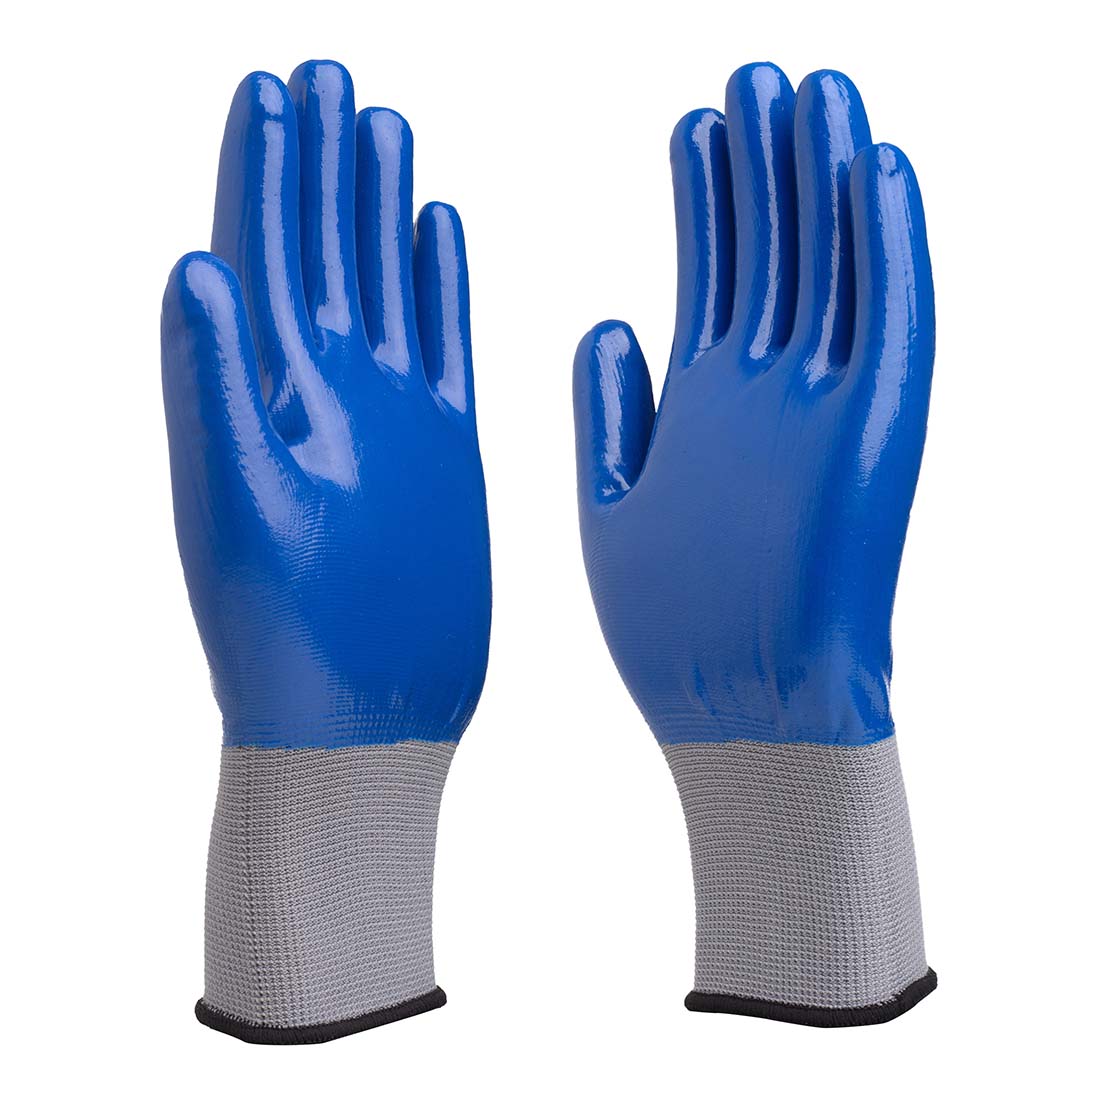 13G polyester glove nitrile fully coated 